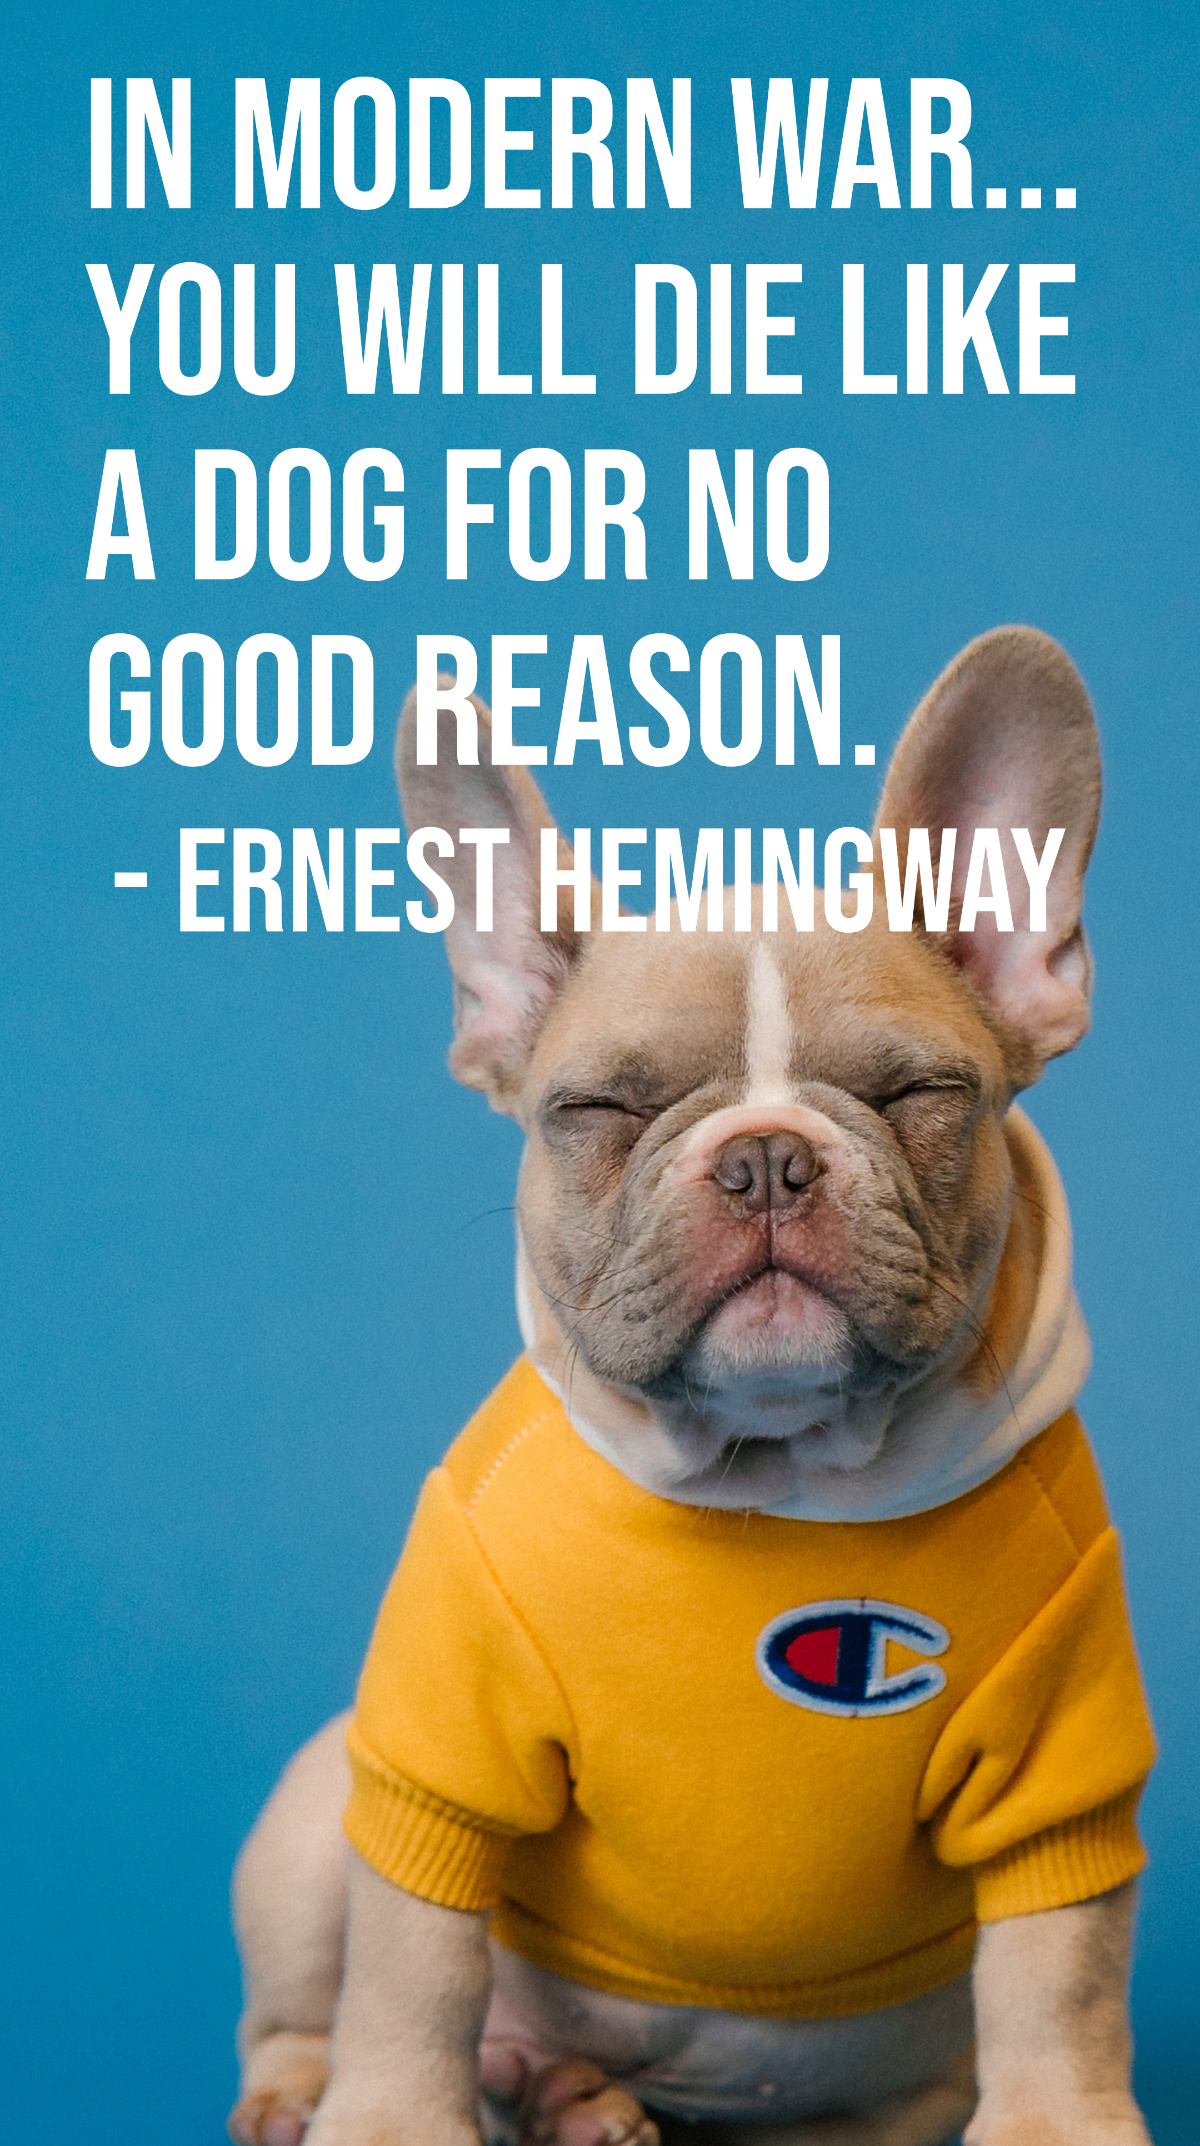 Ernest Hemingway - In modern war... you will die like a dog for no good reason. Template